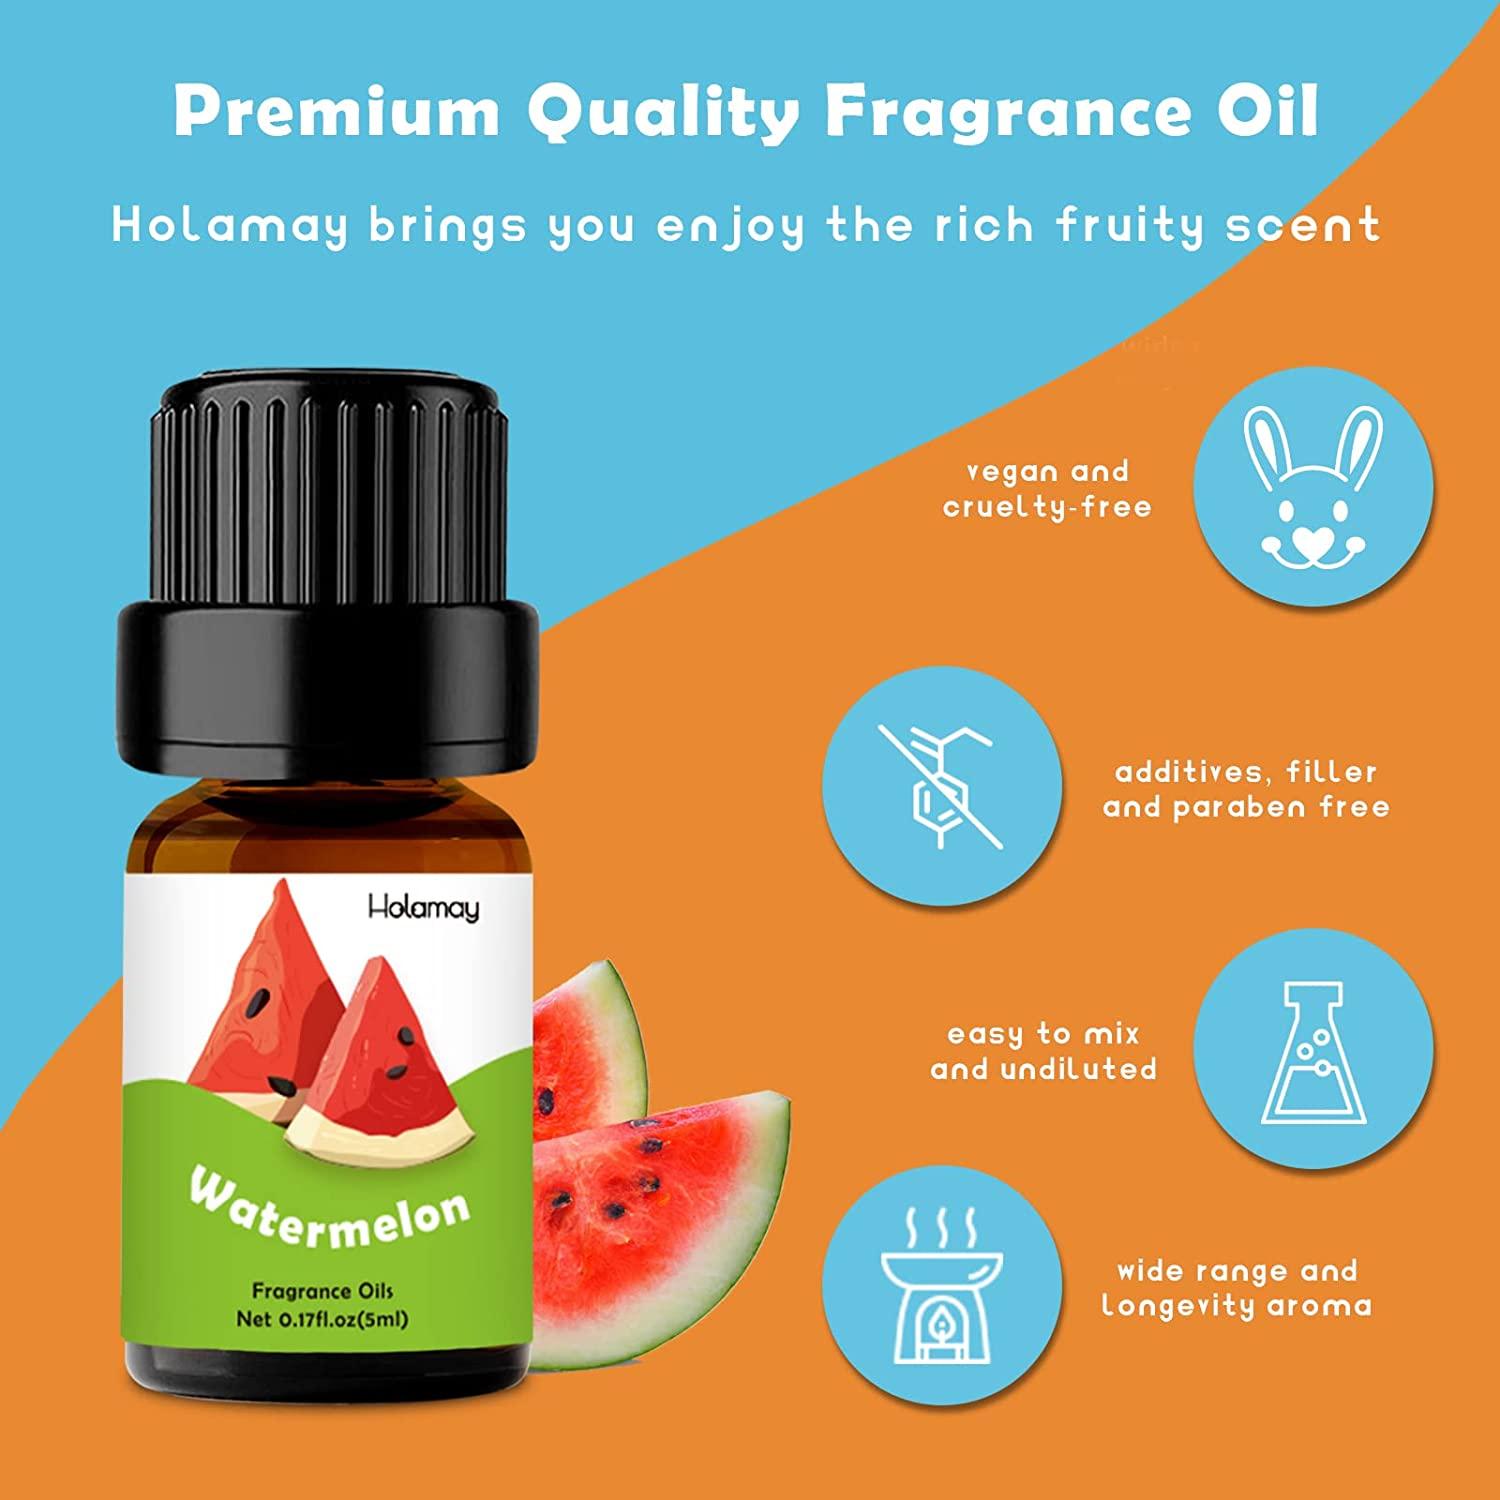 Panaro Fruity Premium Fragrance Oils (Set of 5x10ml) - Refresh Joyful Moods  at Home - Scents Include Grapefruit, Pear, Honey, Apple Figs & Lime - for